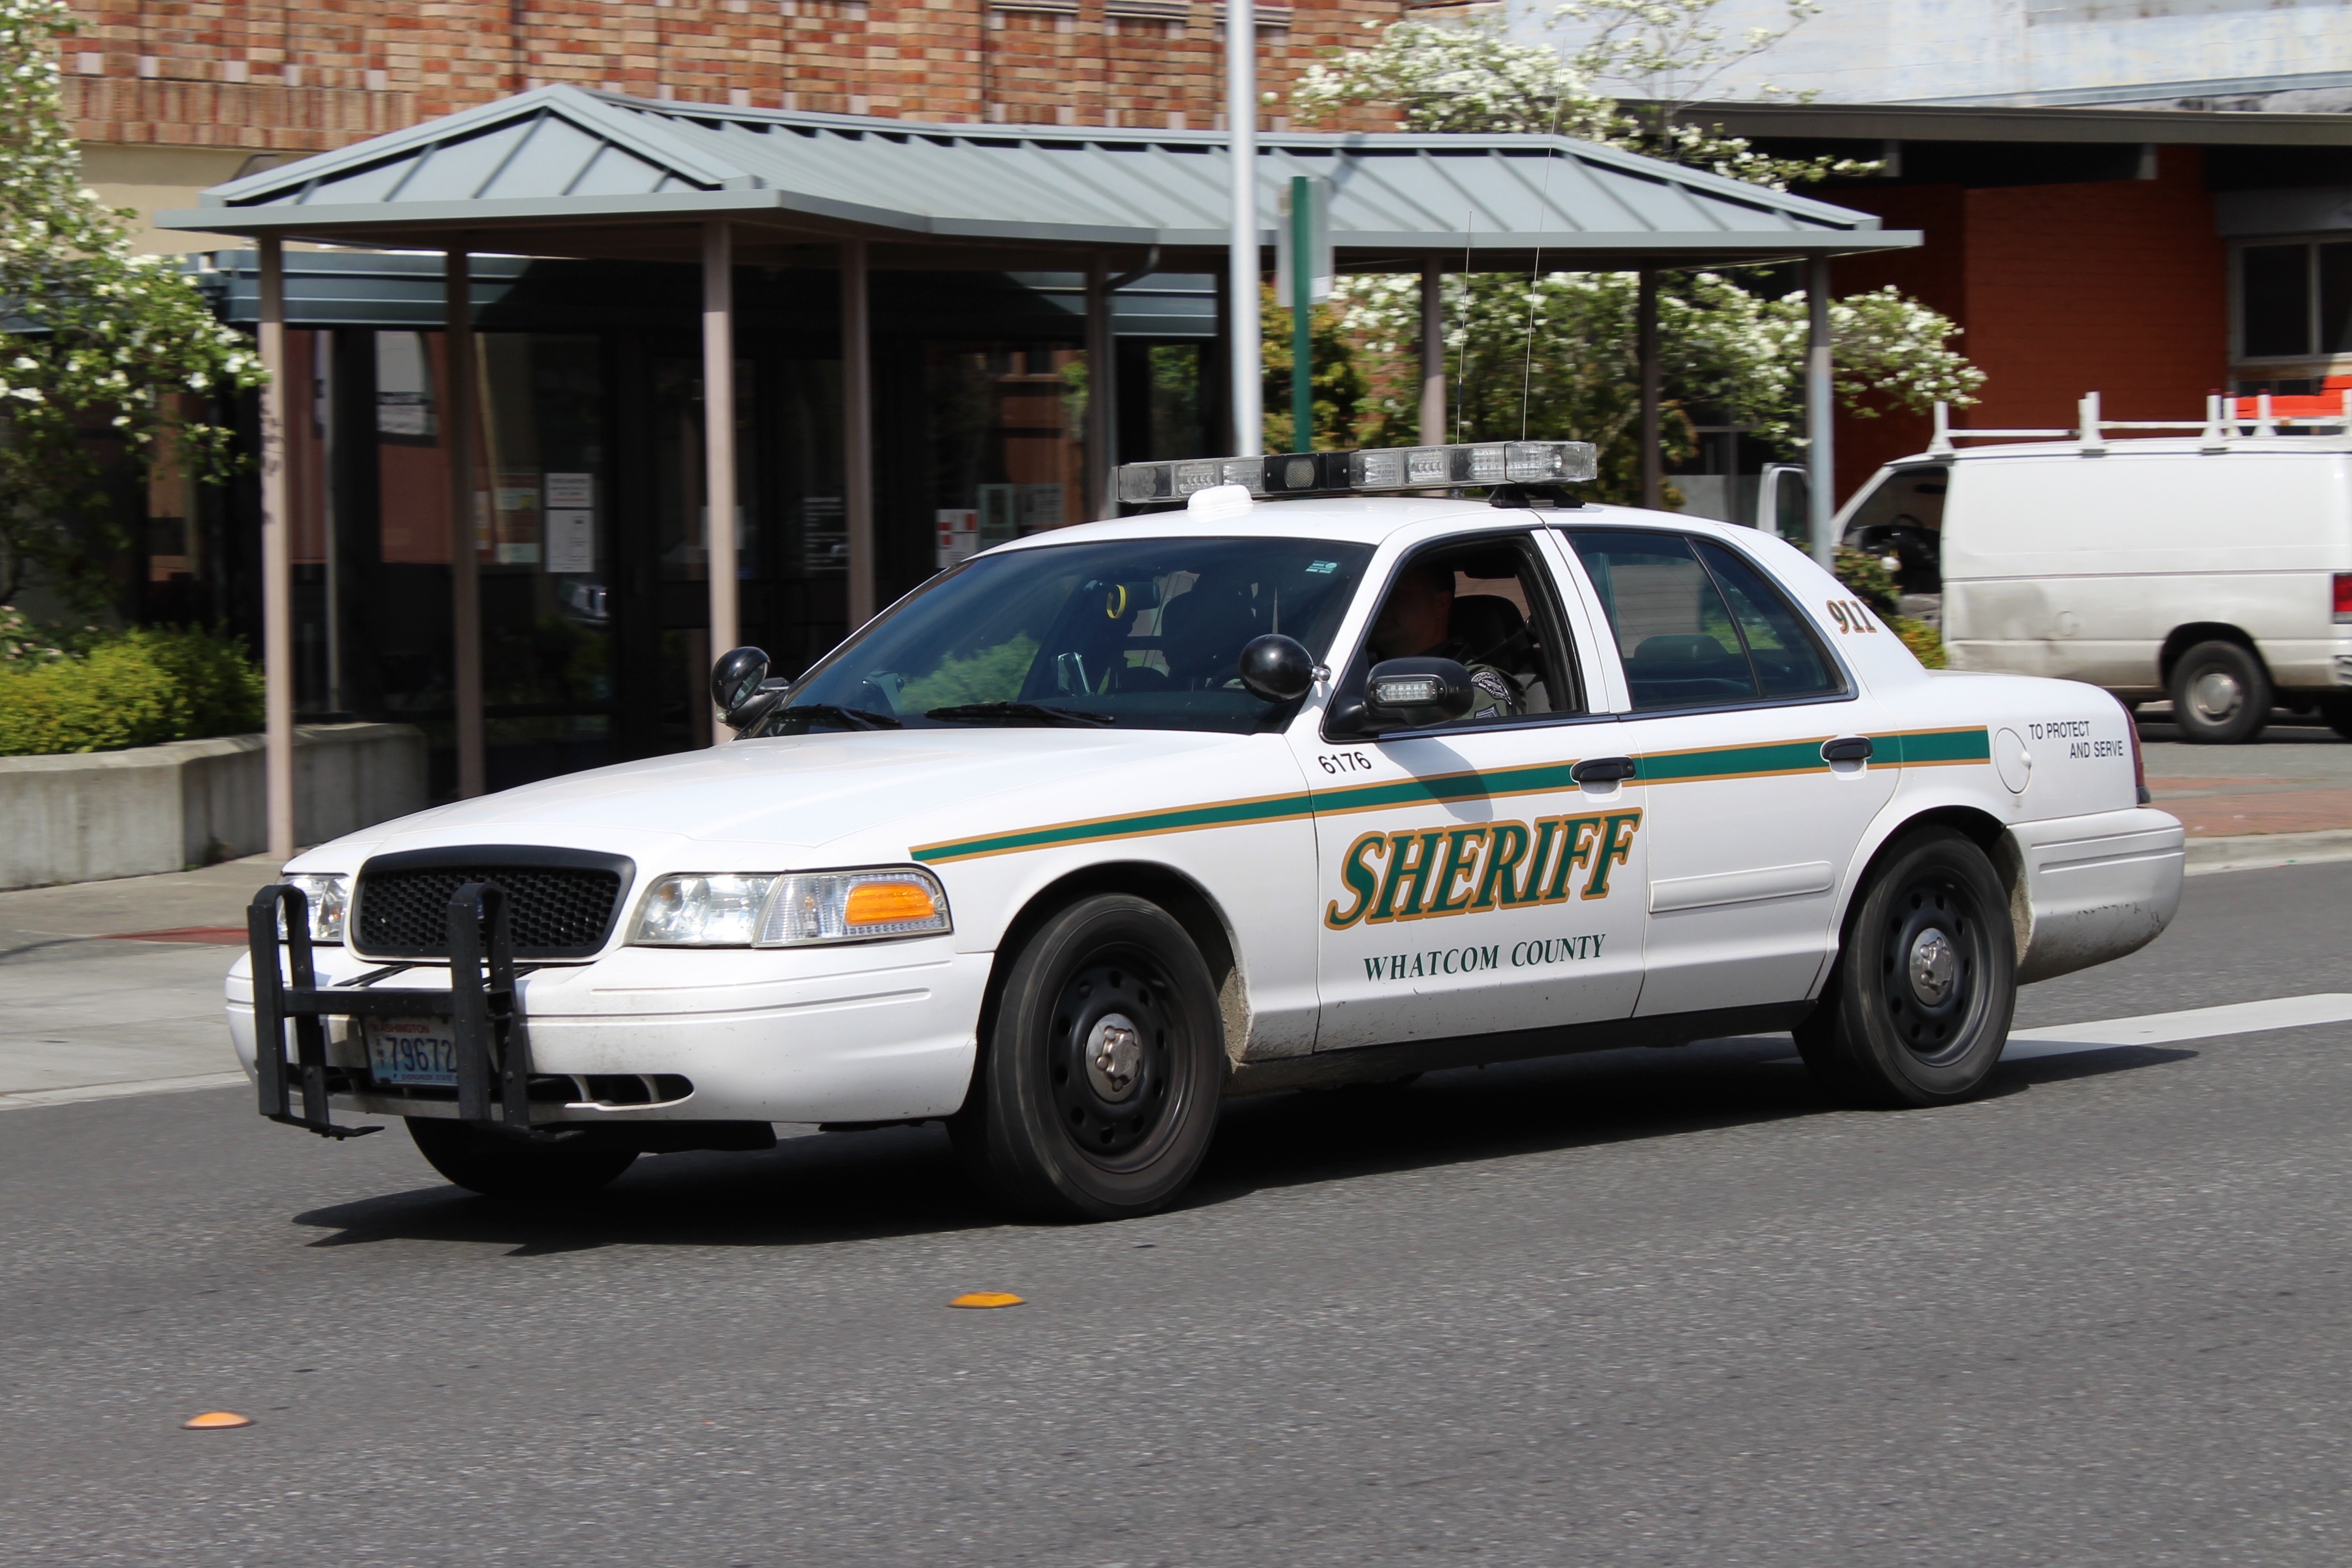 Whatcom county sheriff's office ford crown victoria photo